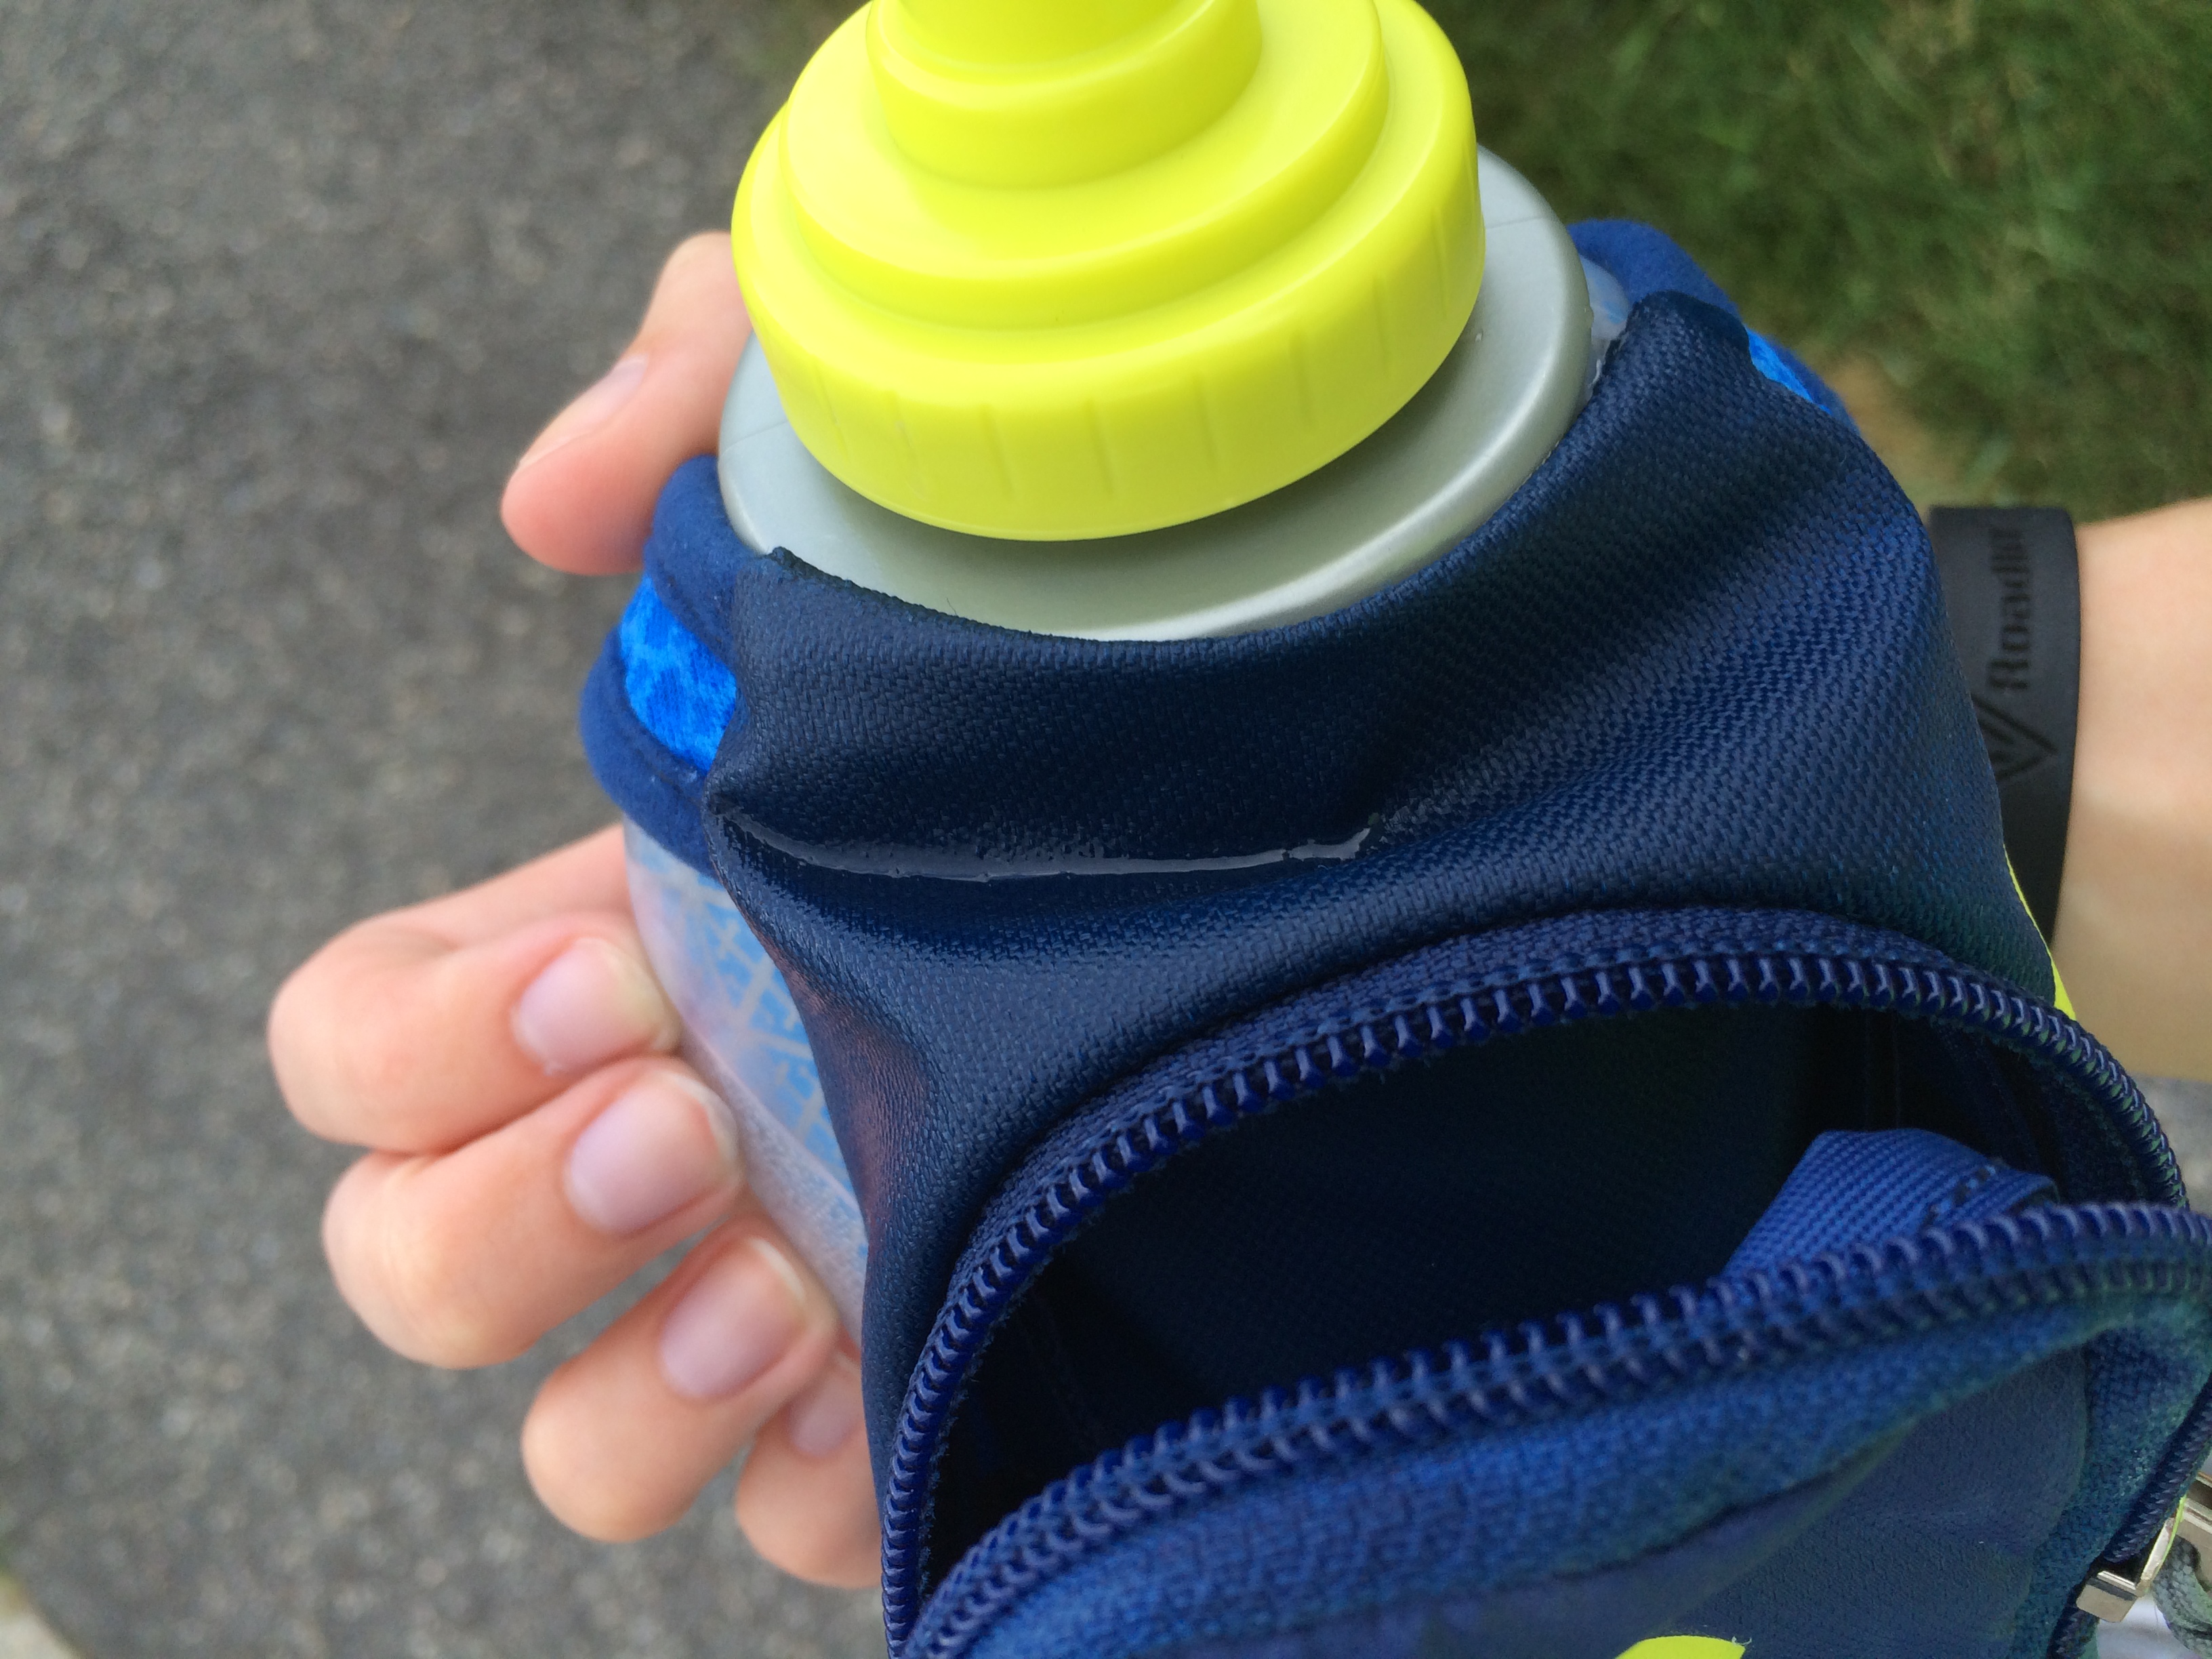 Nathan SpeedDraw Plus Review: Water Bottle That Delivers